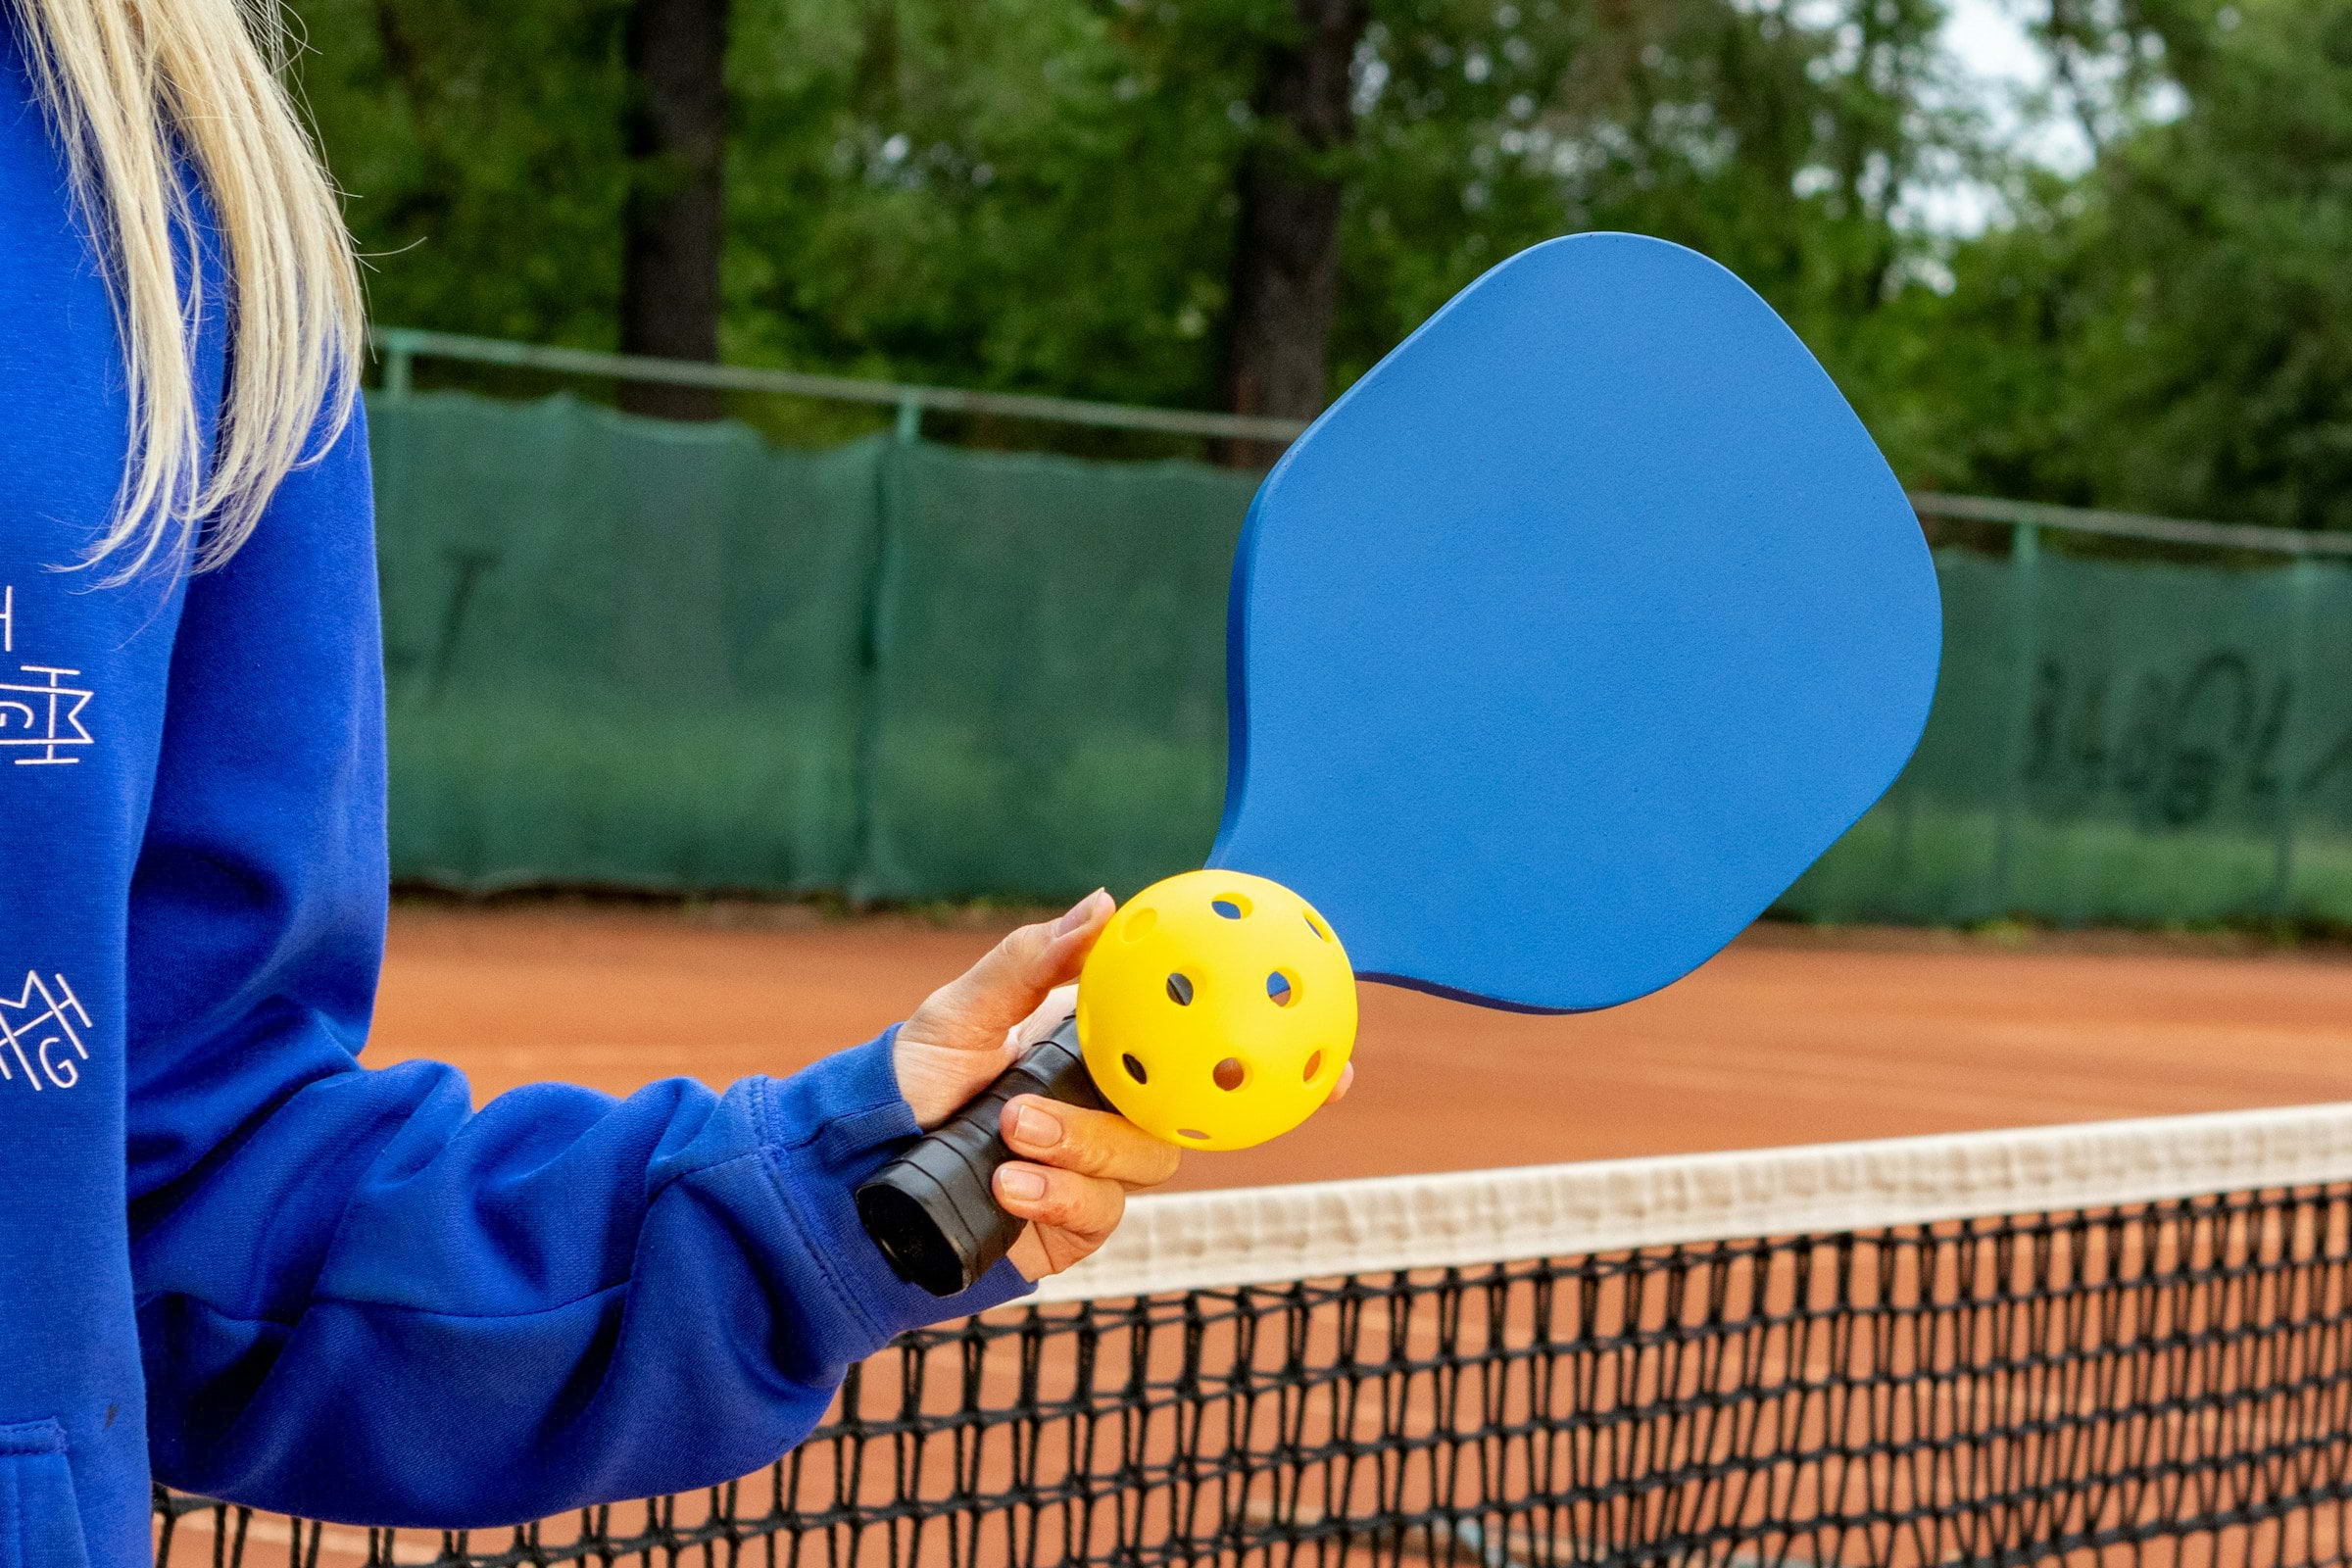 Where to play pickleball in London